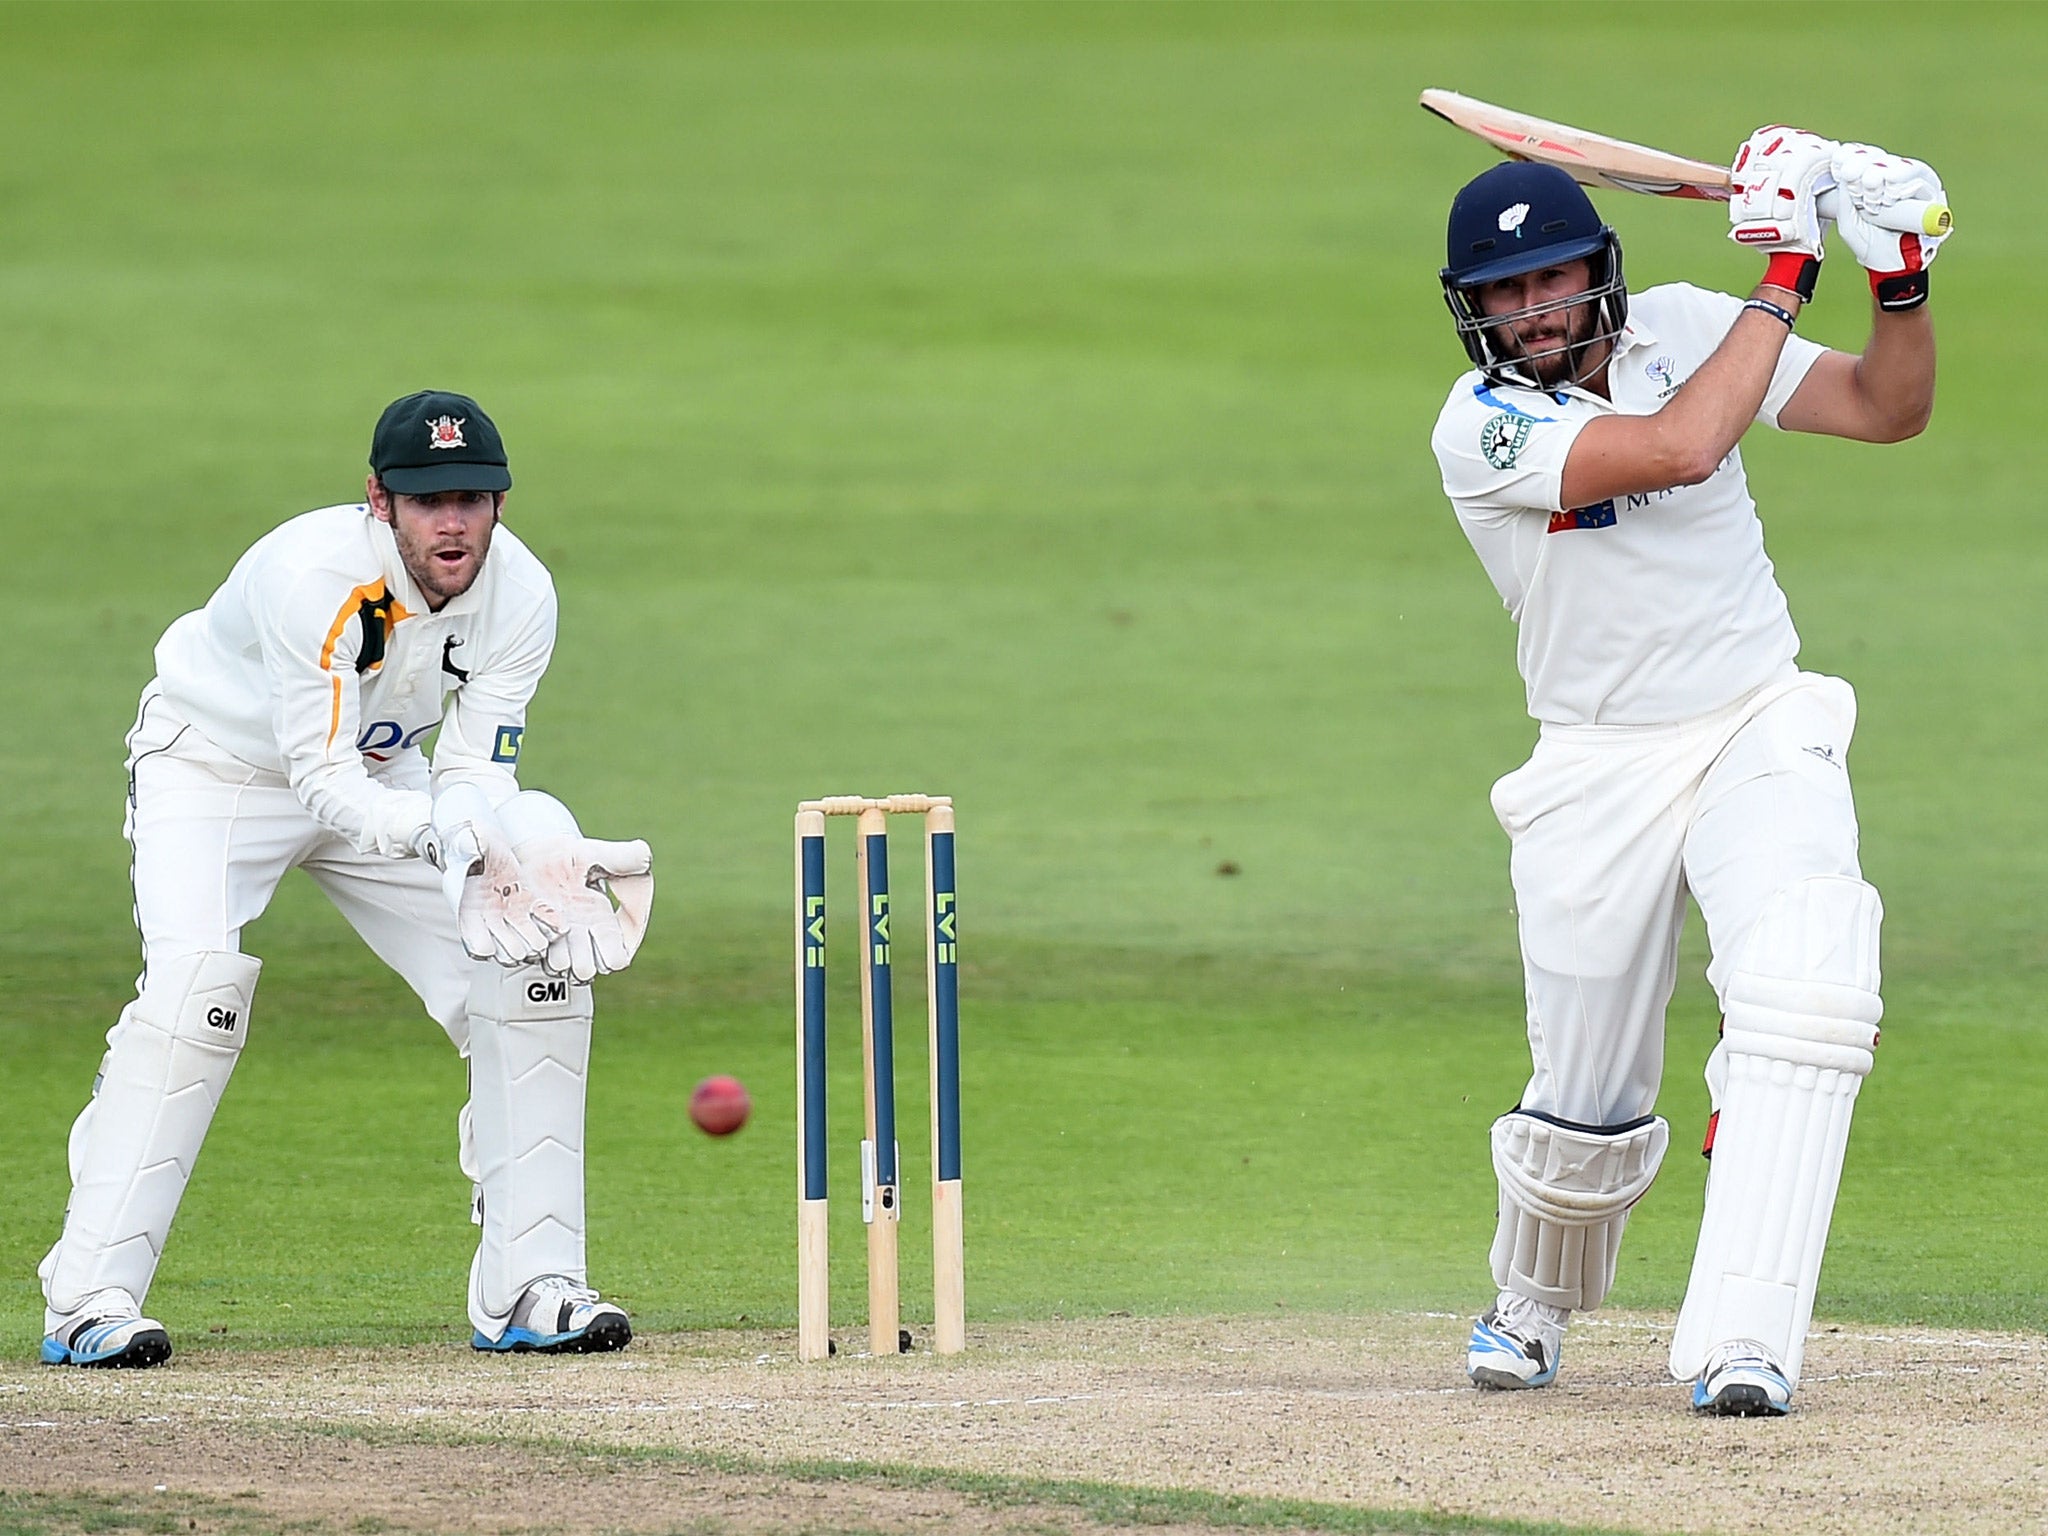 Yorkshire’s Tim Bresnan on his way to 95 against Notts at Trent Bridge